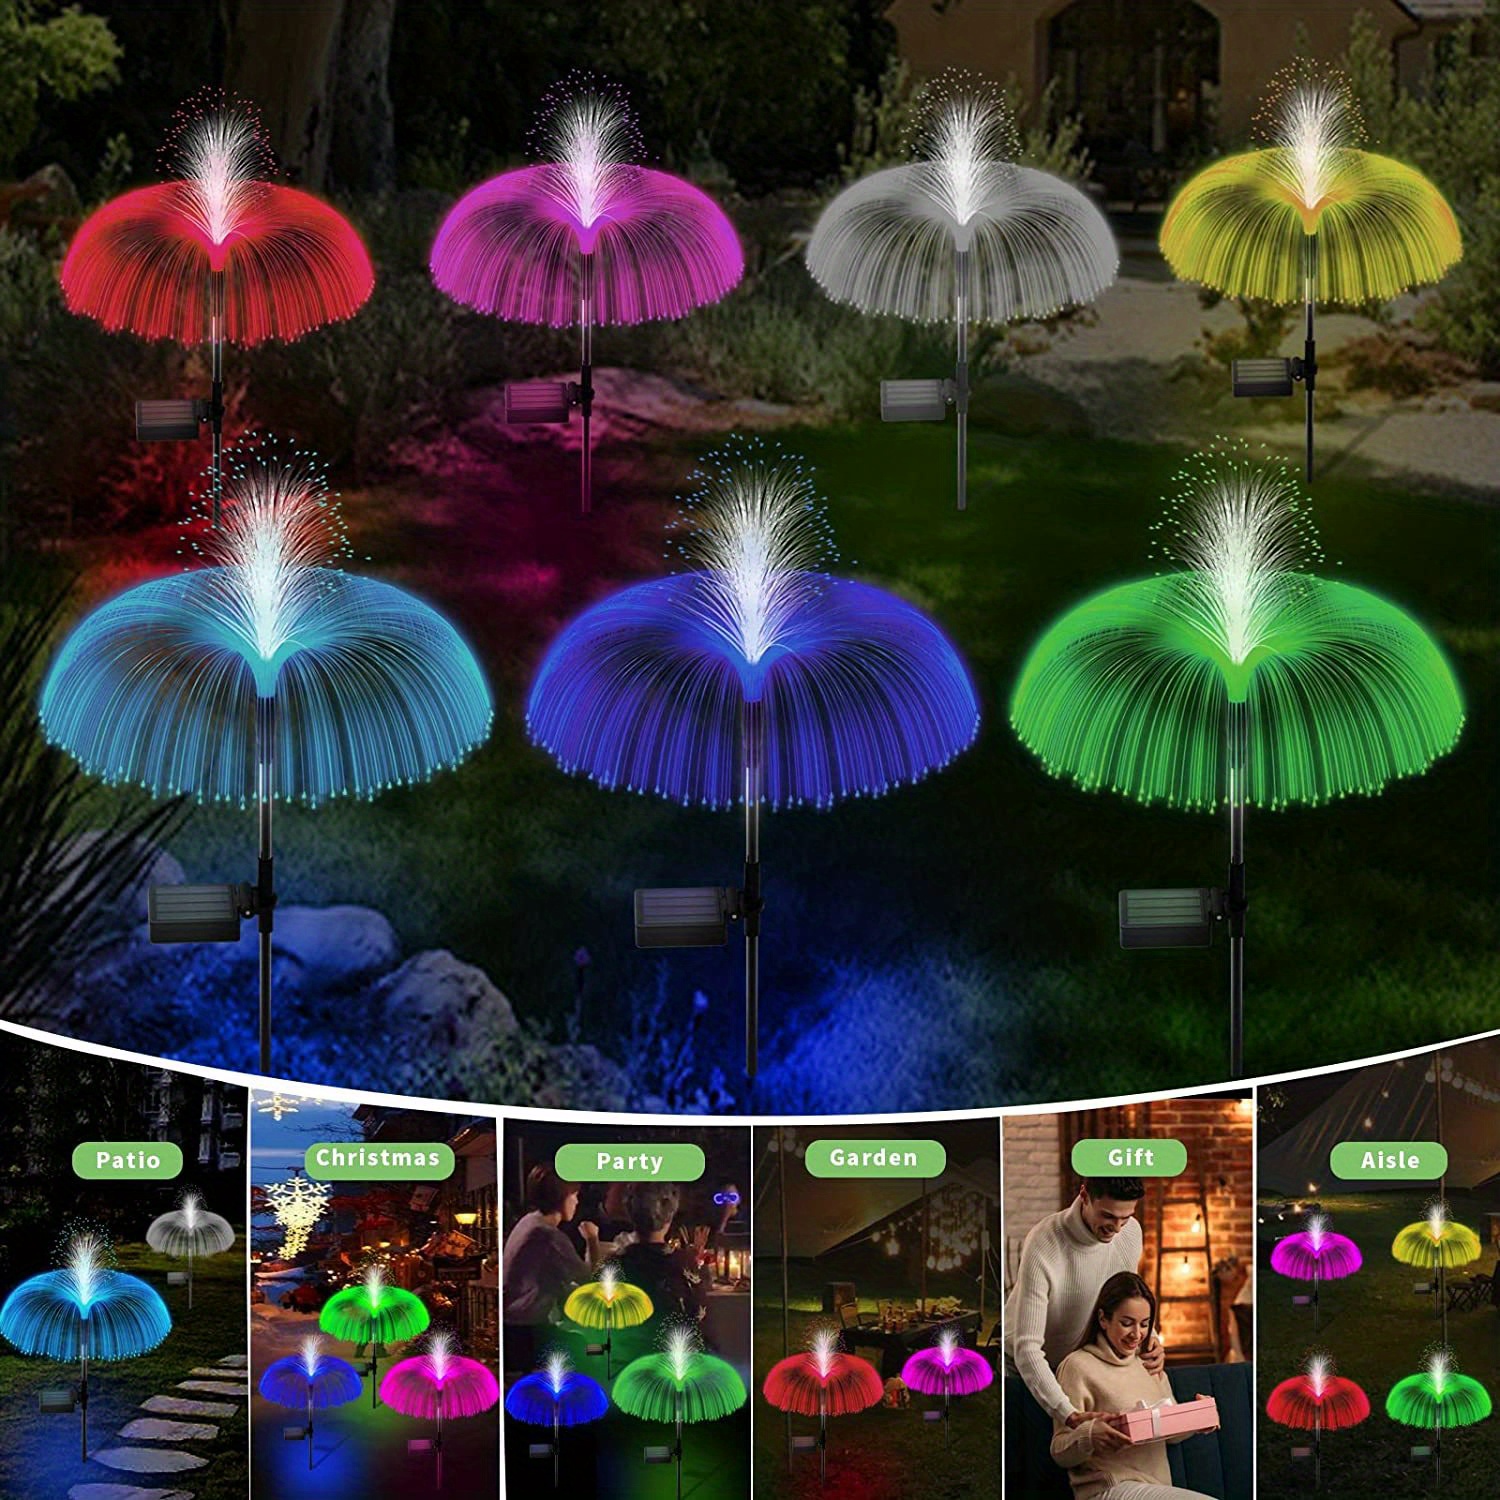 waterproof solar flower fountain lights color changing solar yard light outside decorations solar garden lights stake decor for pathway patio lawn party wedding holiday birthday details 2